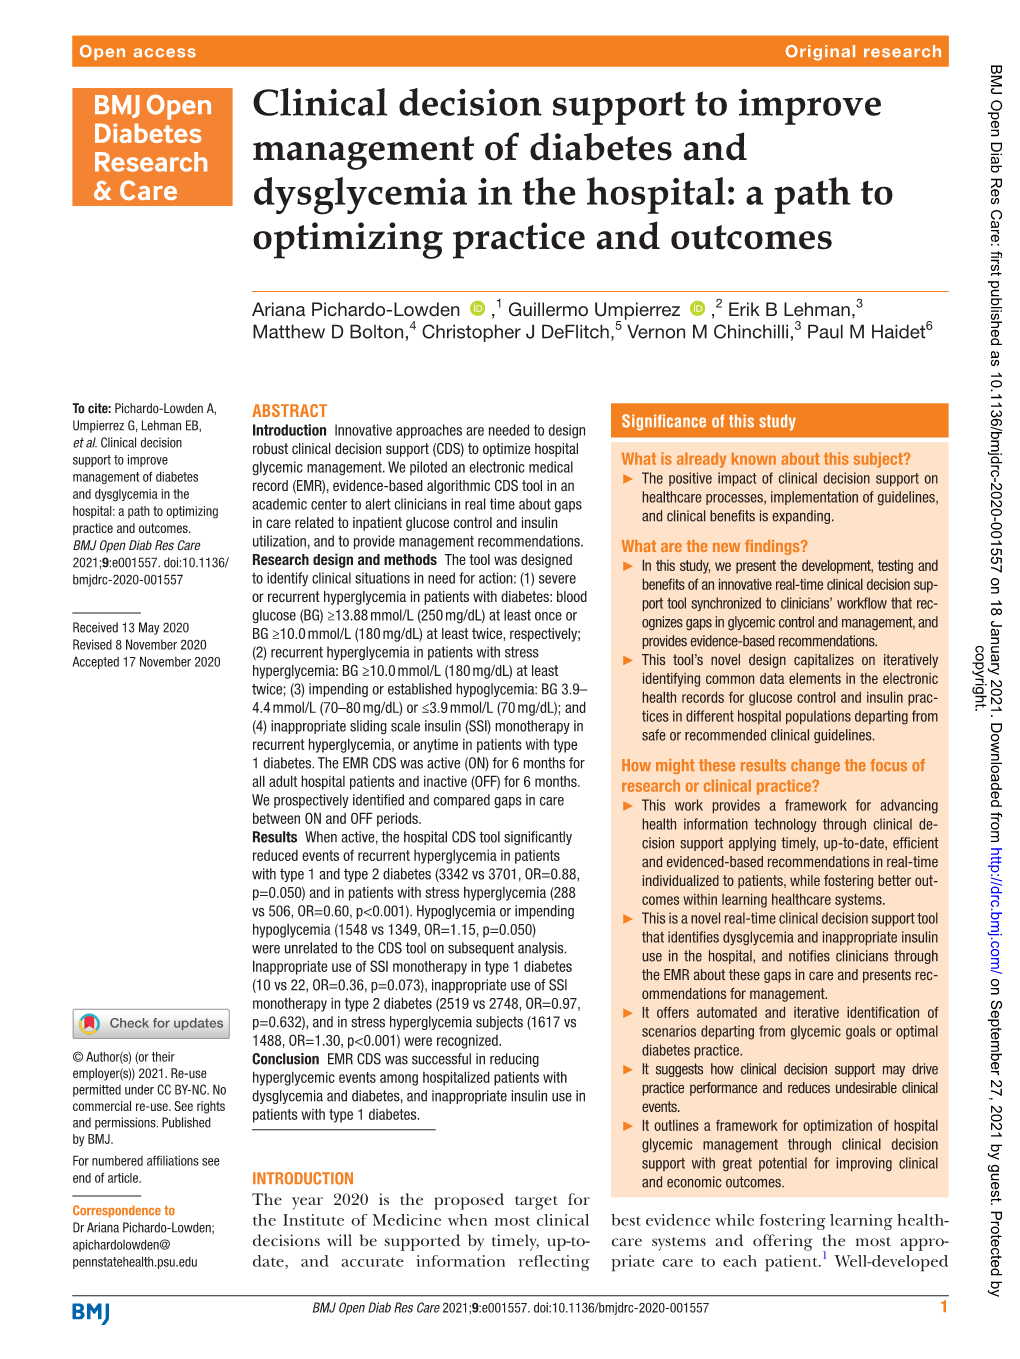 Clinical Decision Support to Improve Management of Diabetes and Dysglycemia in the Hospital: a Path to Optimizing Practice and Outcomes